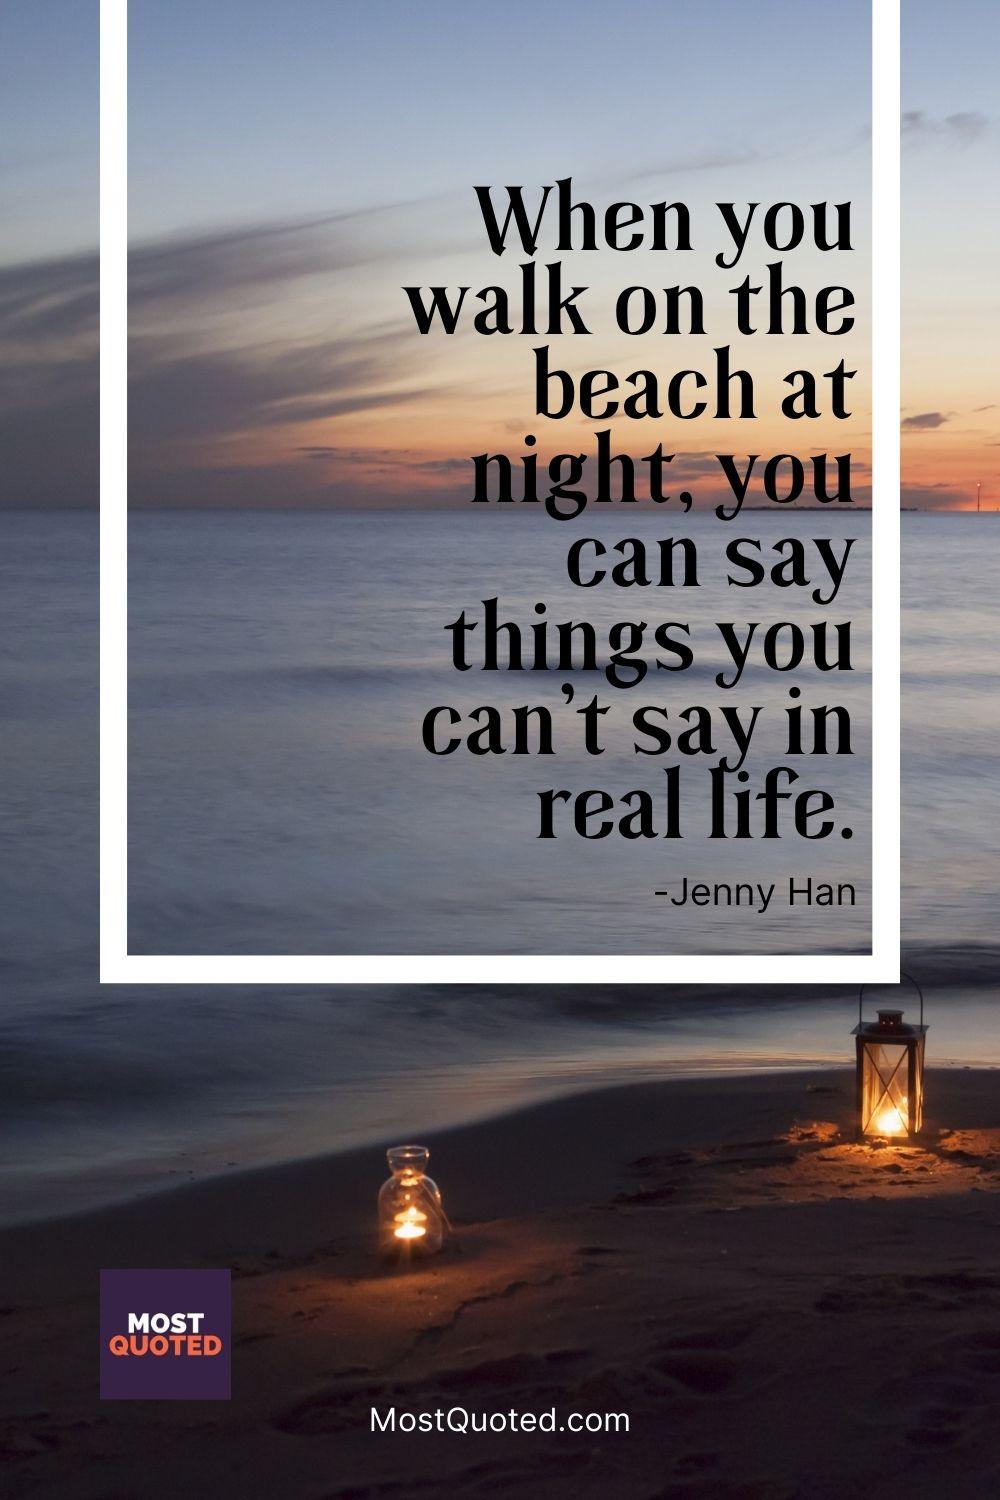 When you walk on the beach at night, you can say things you can’t say in real life. - Jenny Han